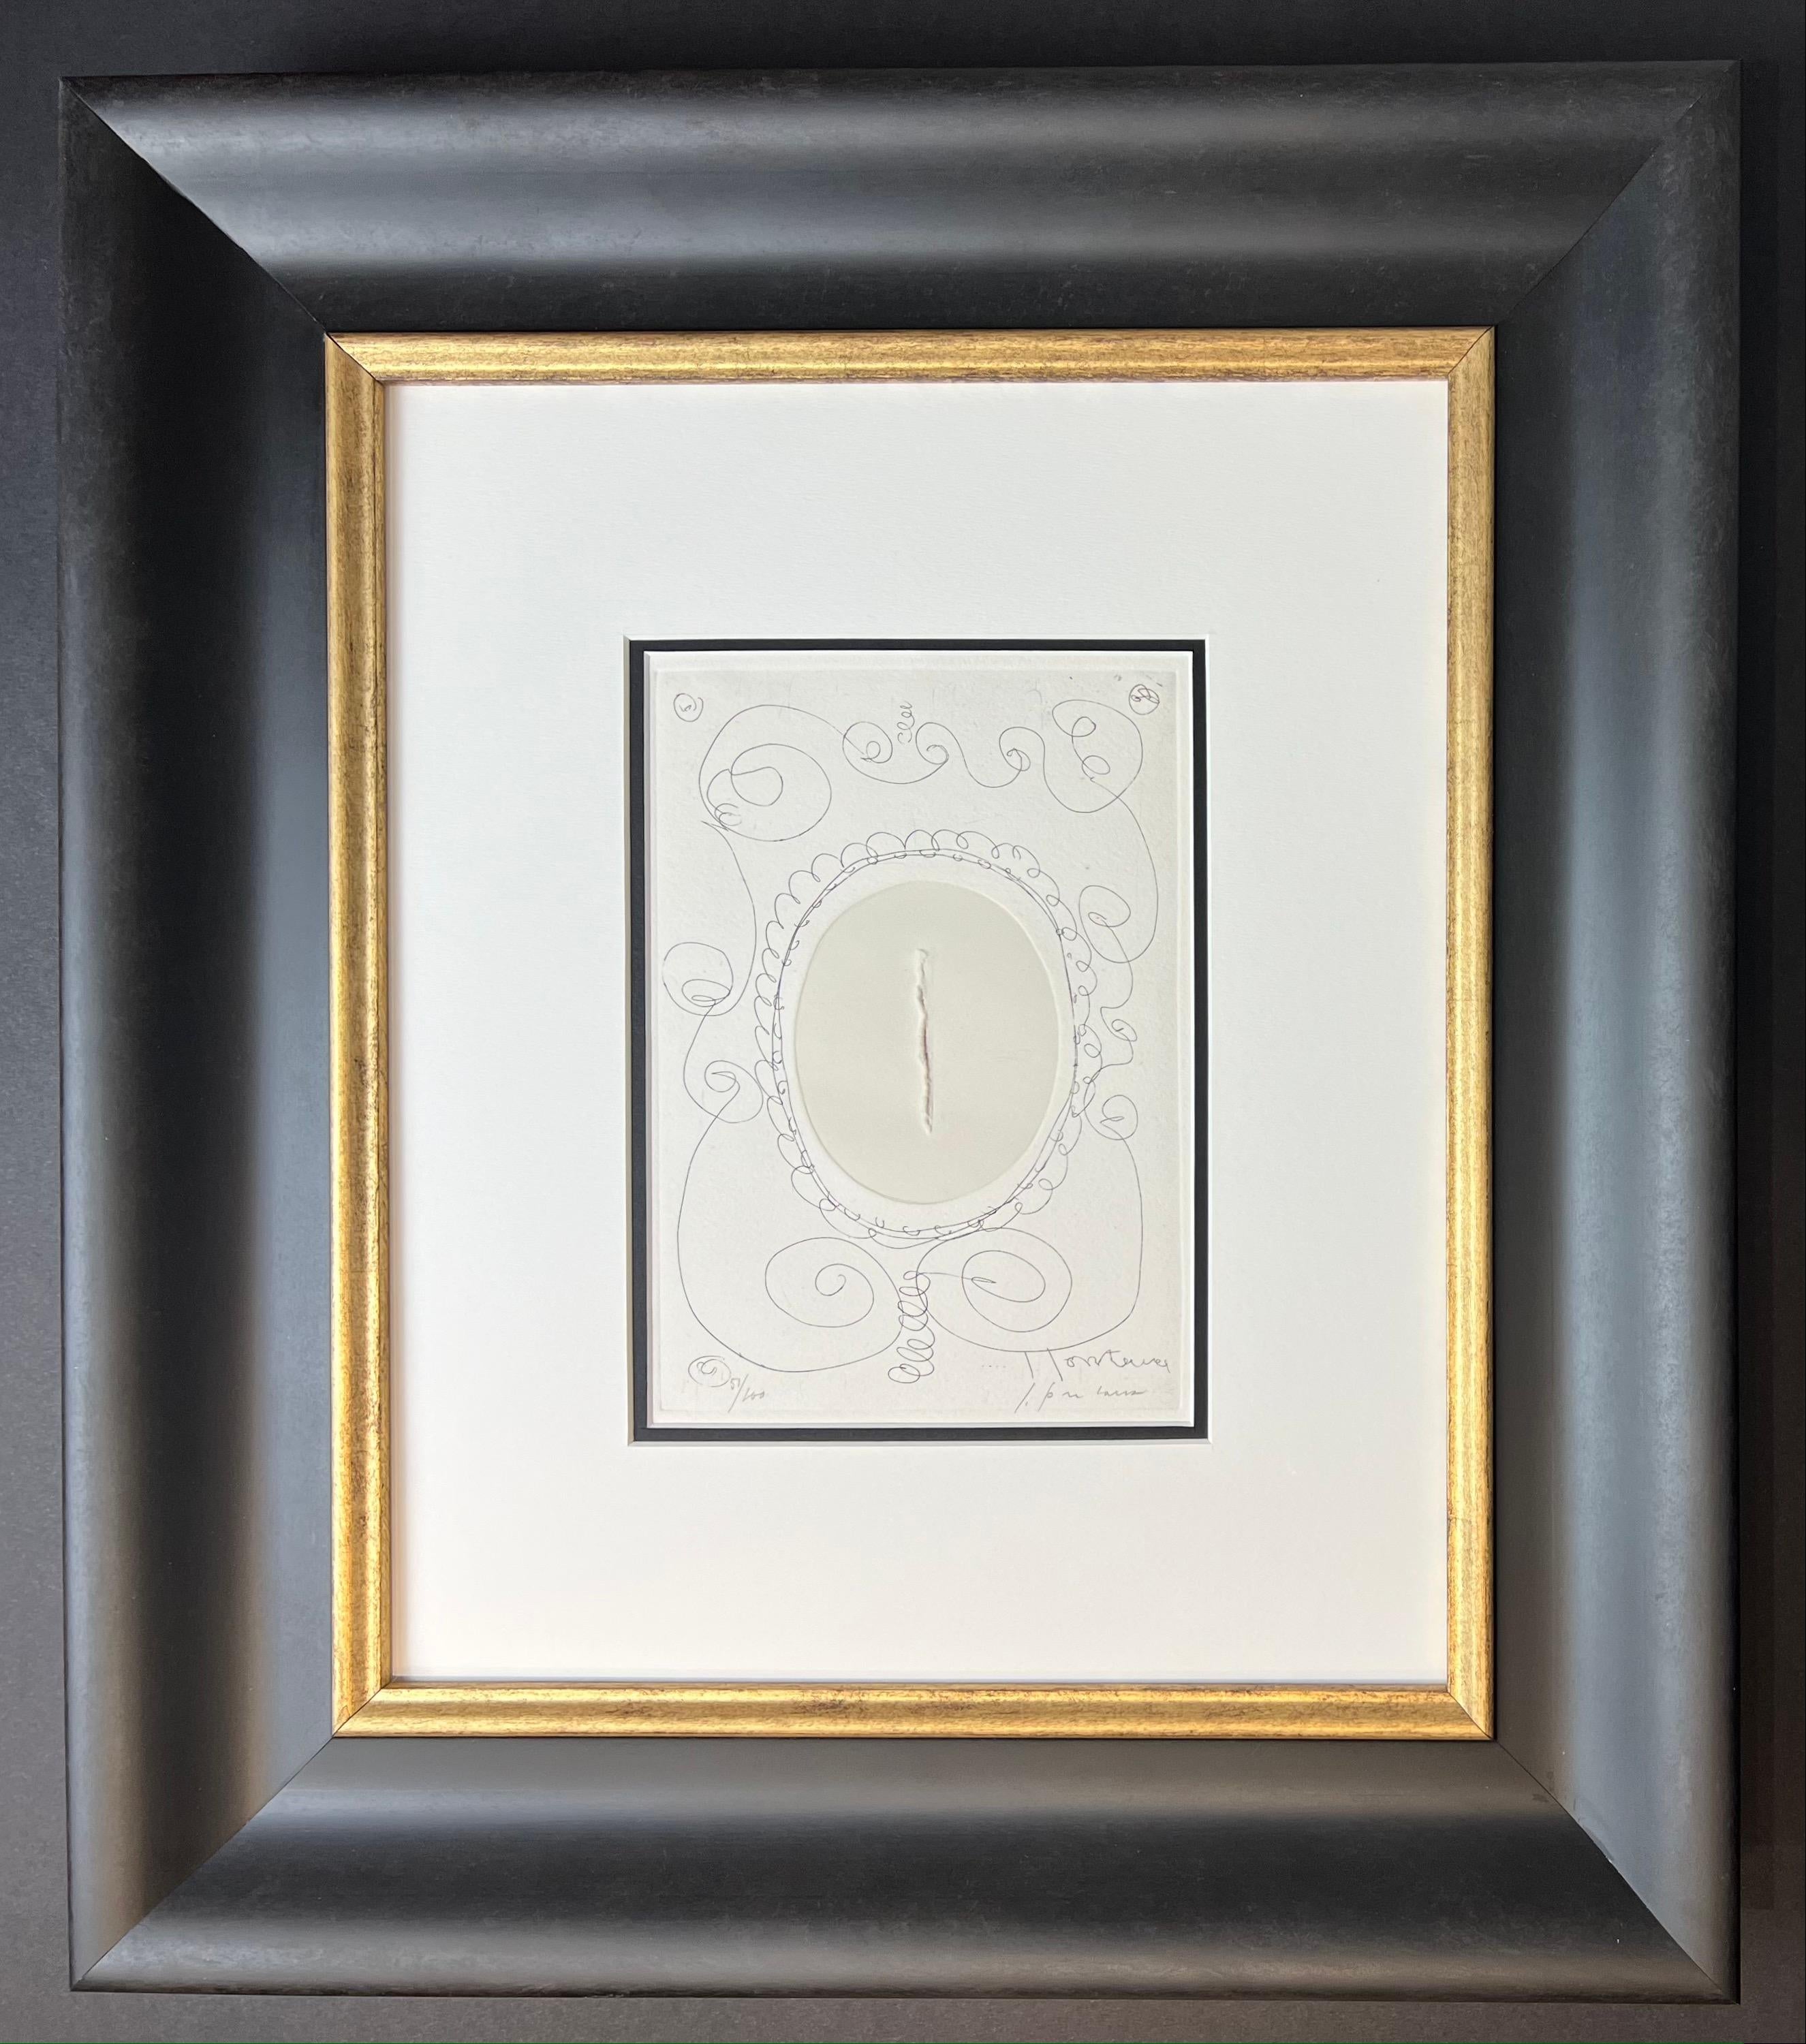 Lucio Fontana ( 1899 – 1968 ) – etching with cut executed by Lucio Fontana -1966 4